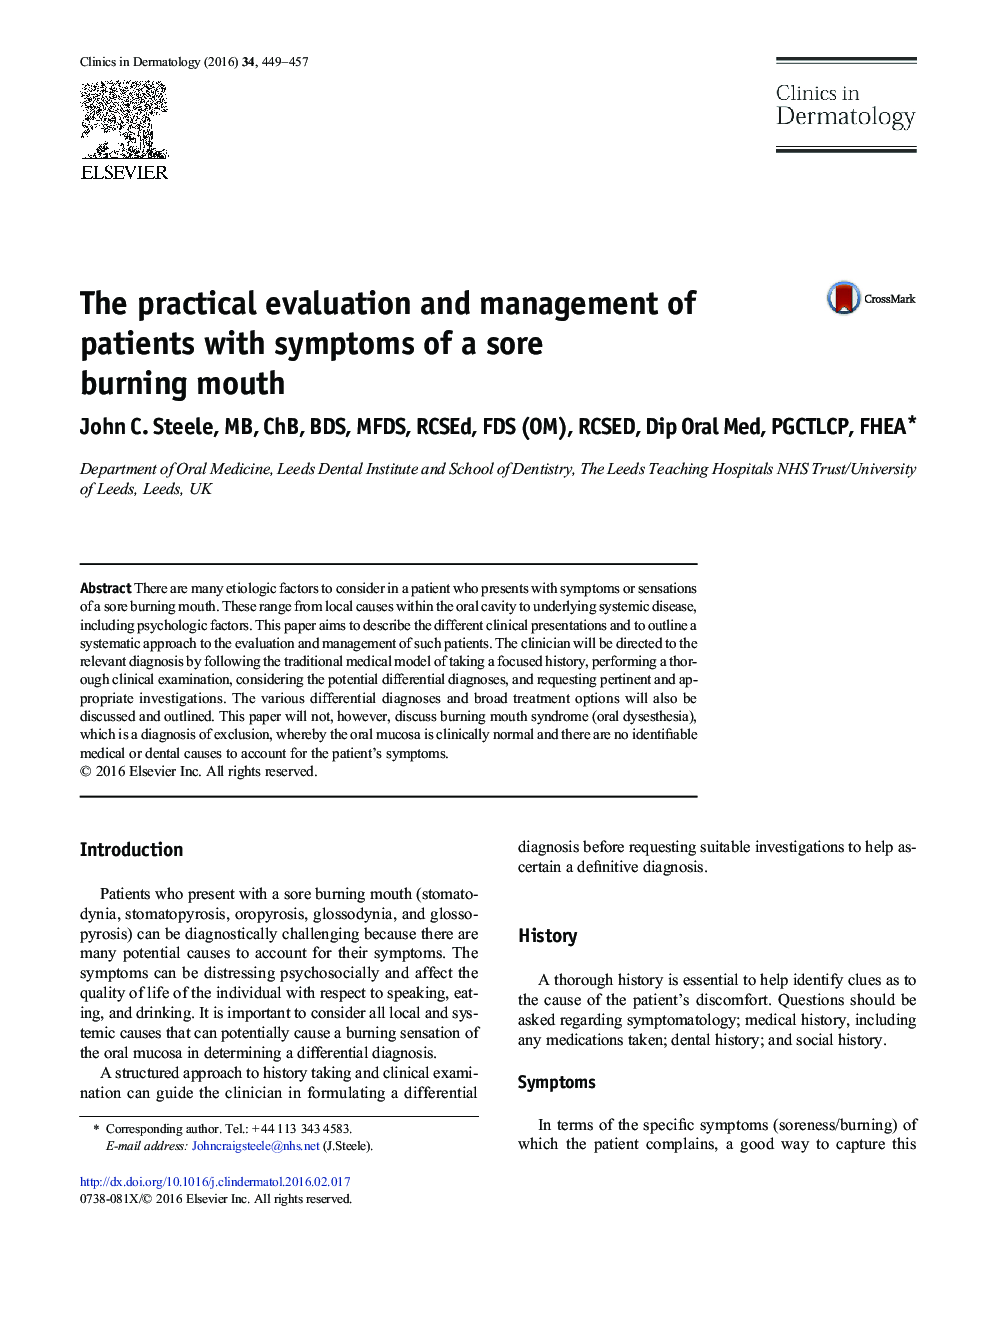 The practical evaluation and management of patients with symptoms of a sore burning mouth